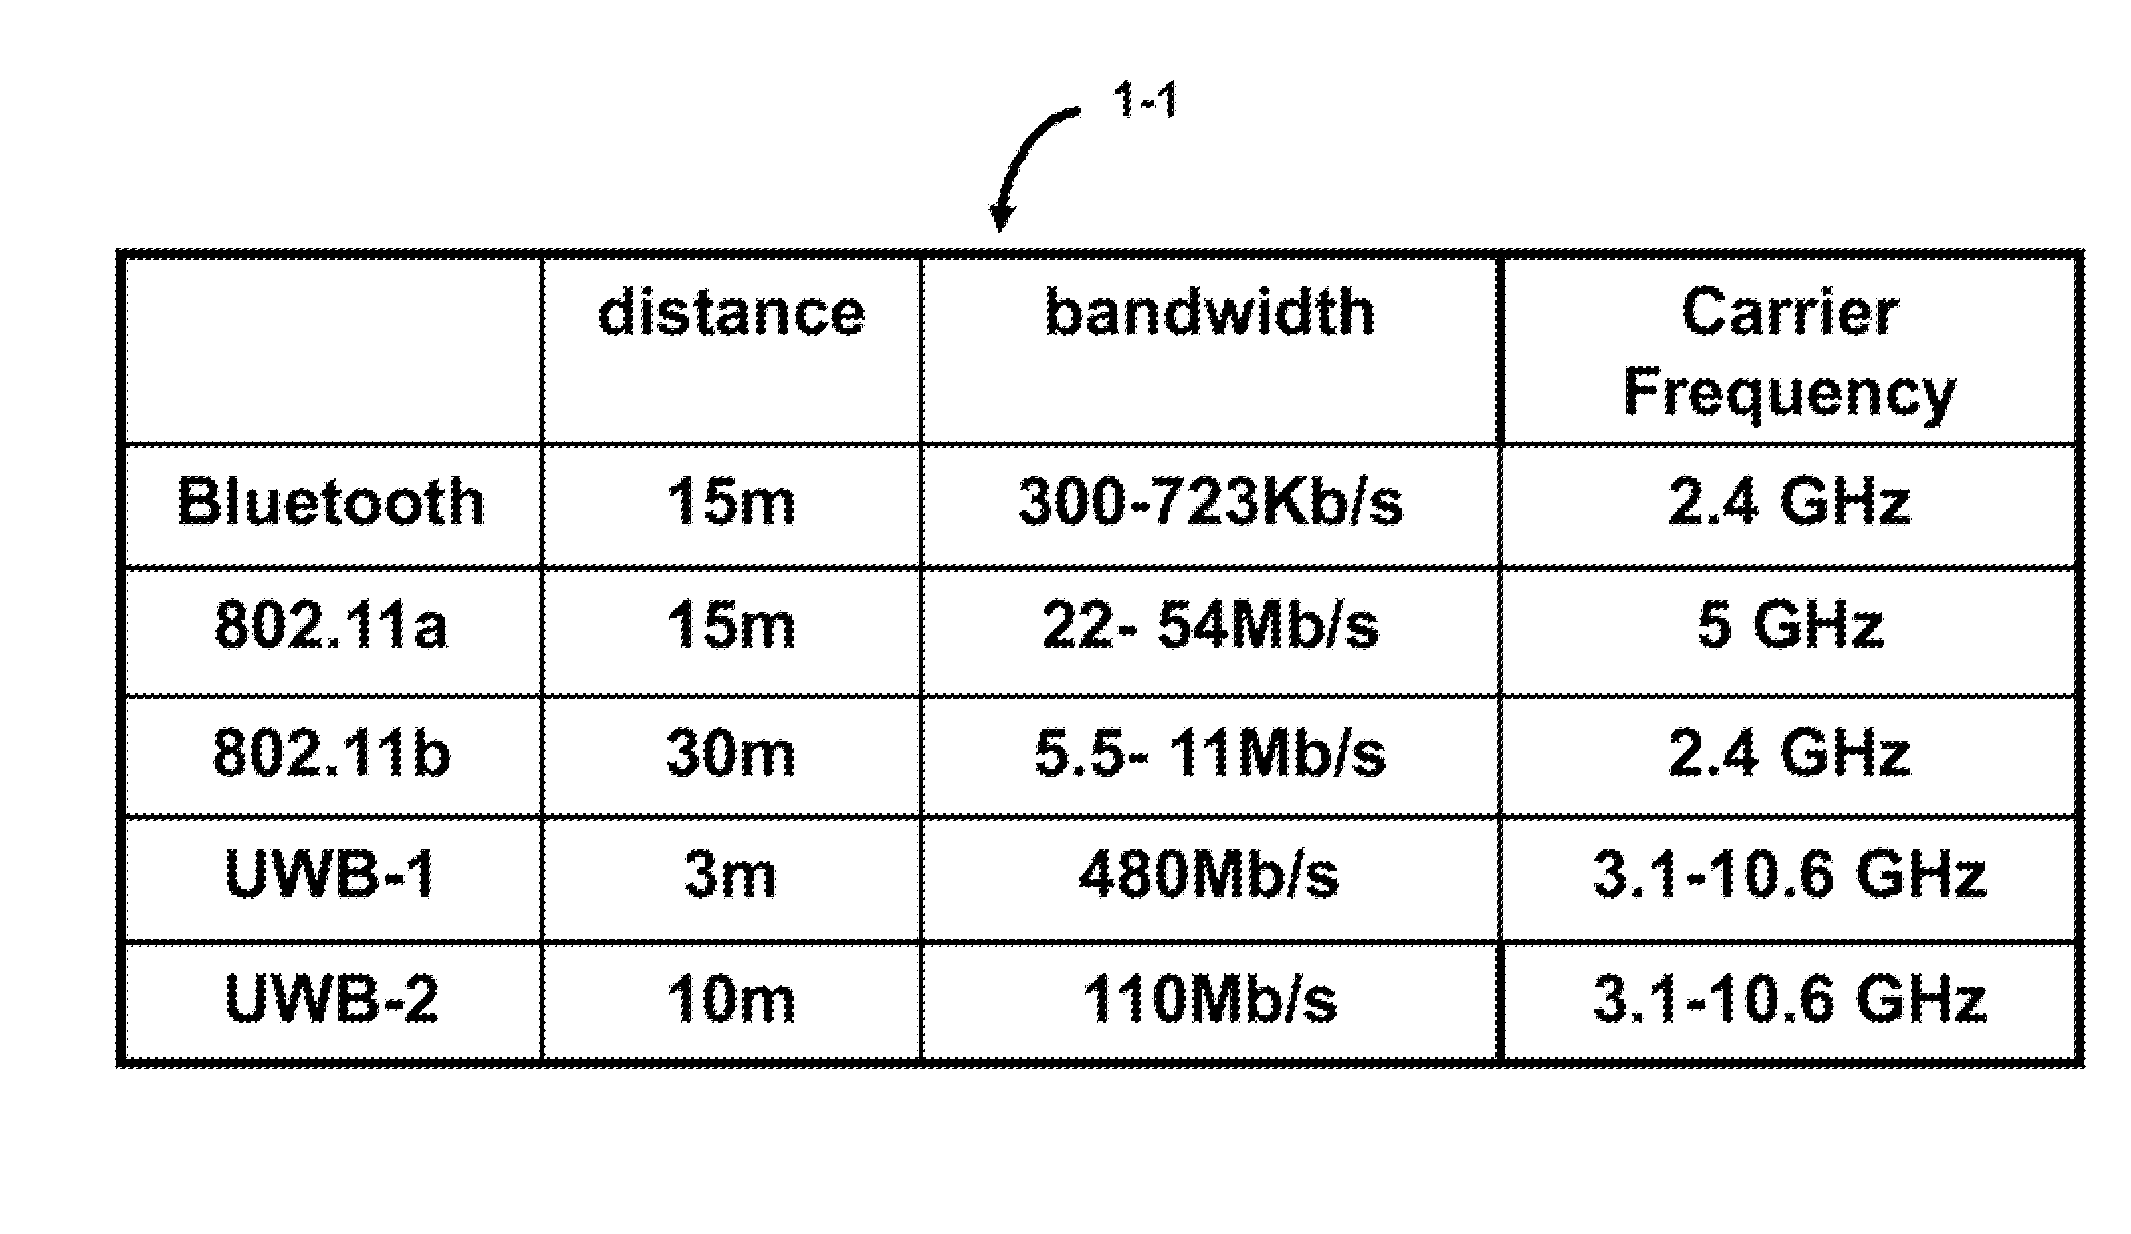 Apparatus and method of a configurable network